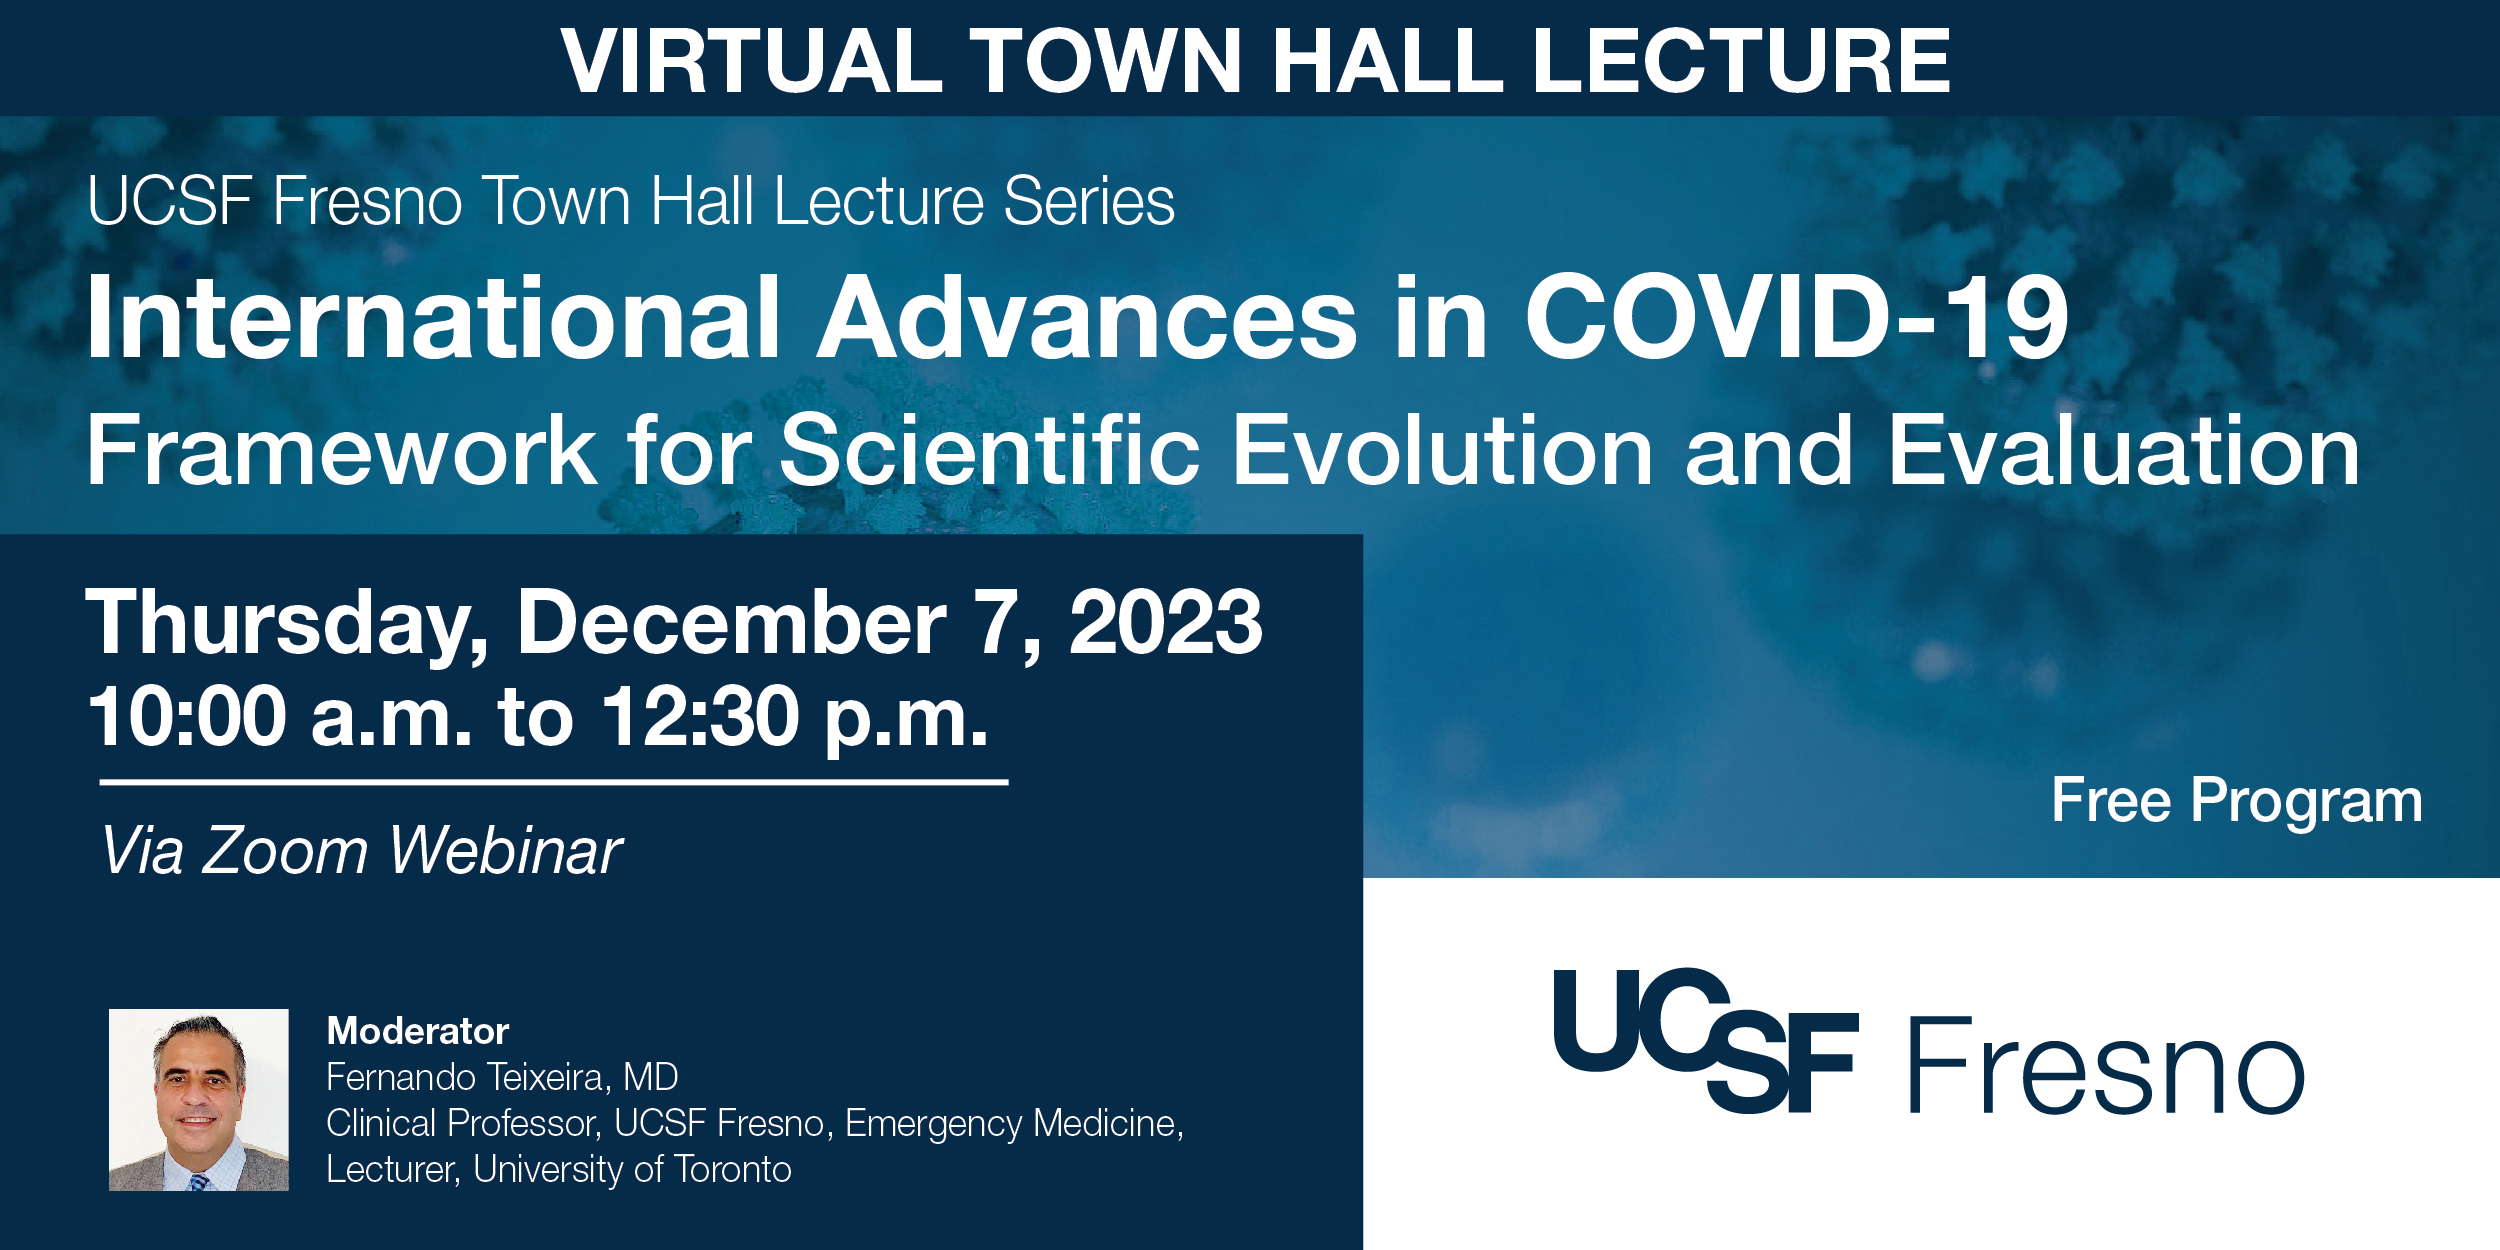 Virtual Town Hall Lecture Flyer